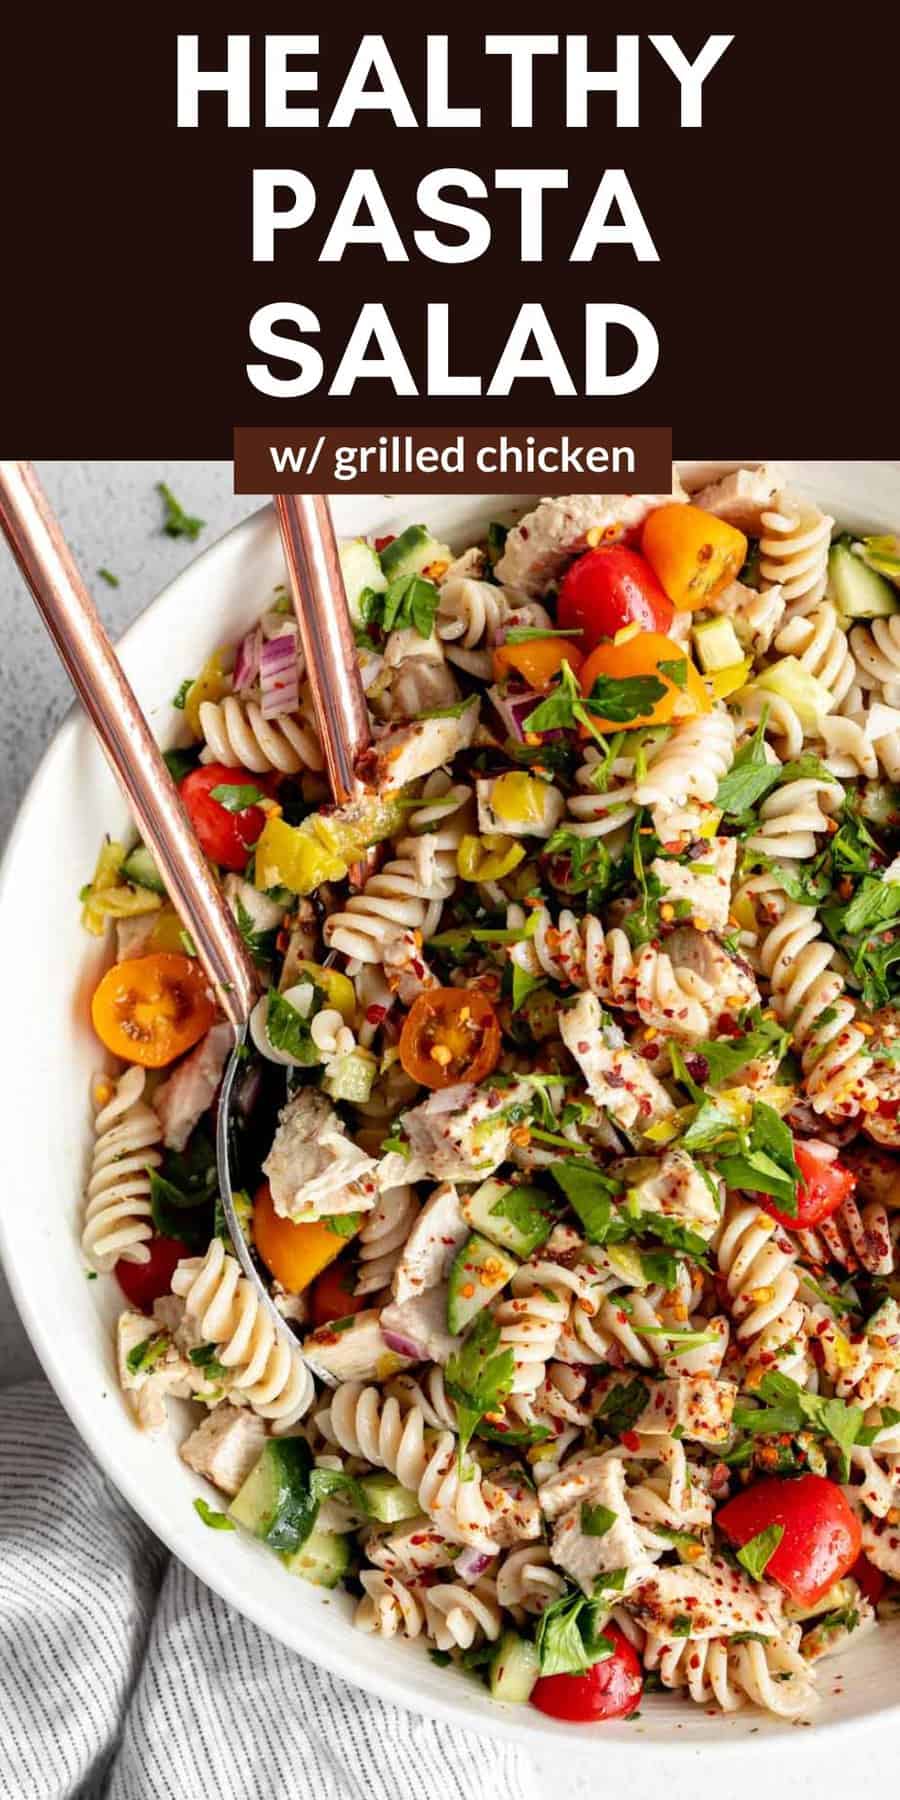 Gluten Free Pasta Salad - Eat With Clarity